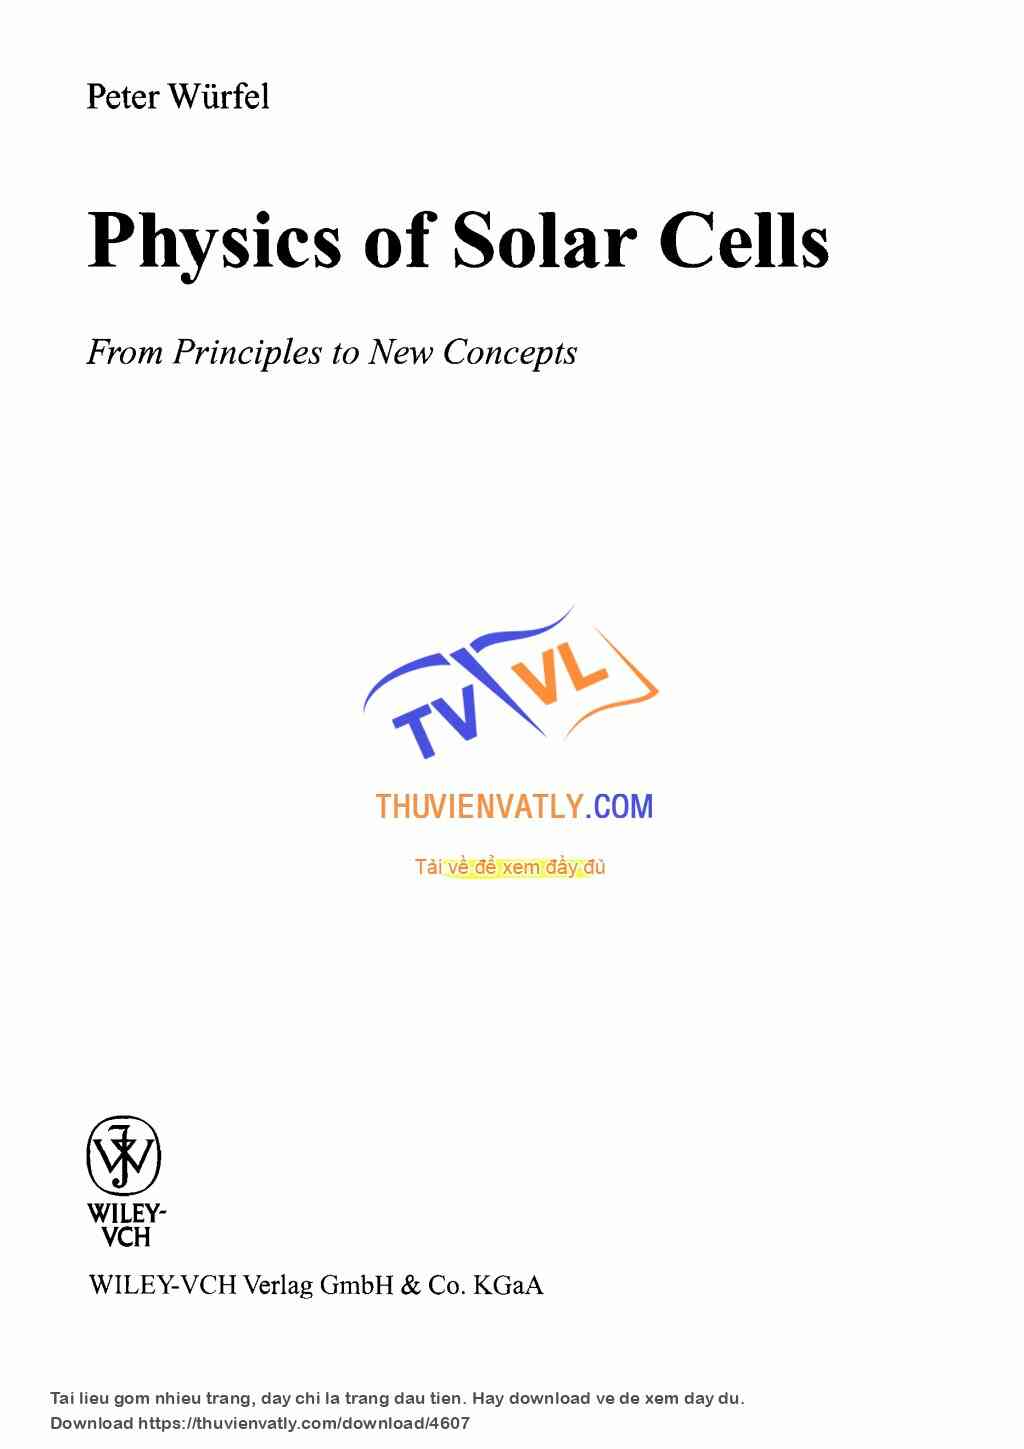 Physics of Solar Cells - From Principles to New Concepts